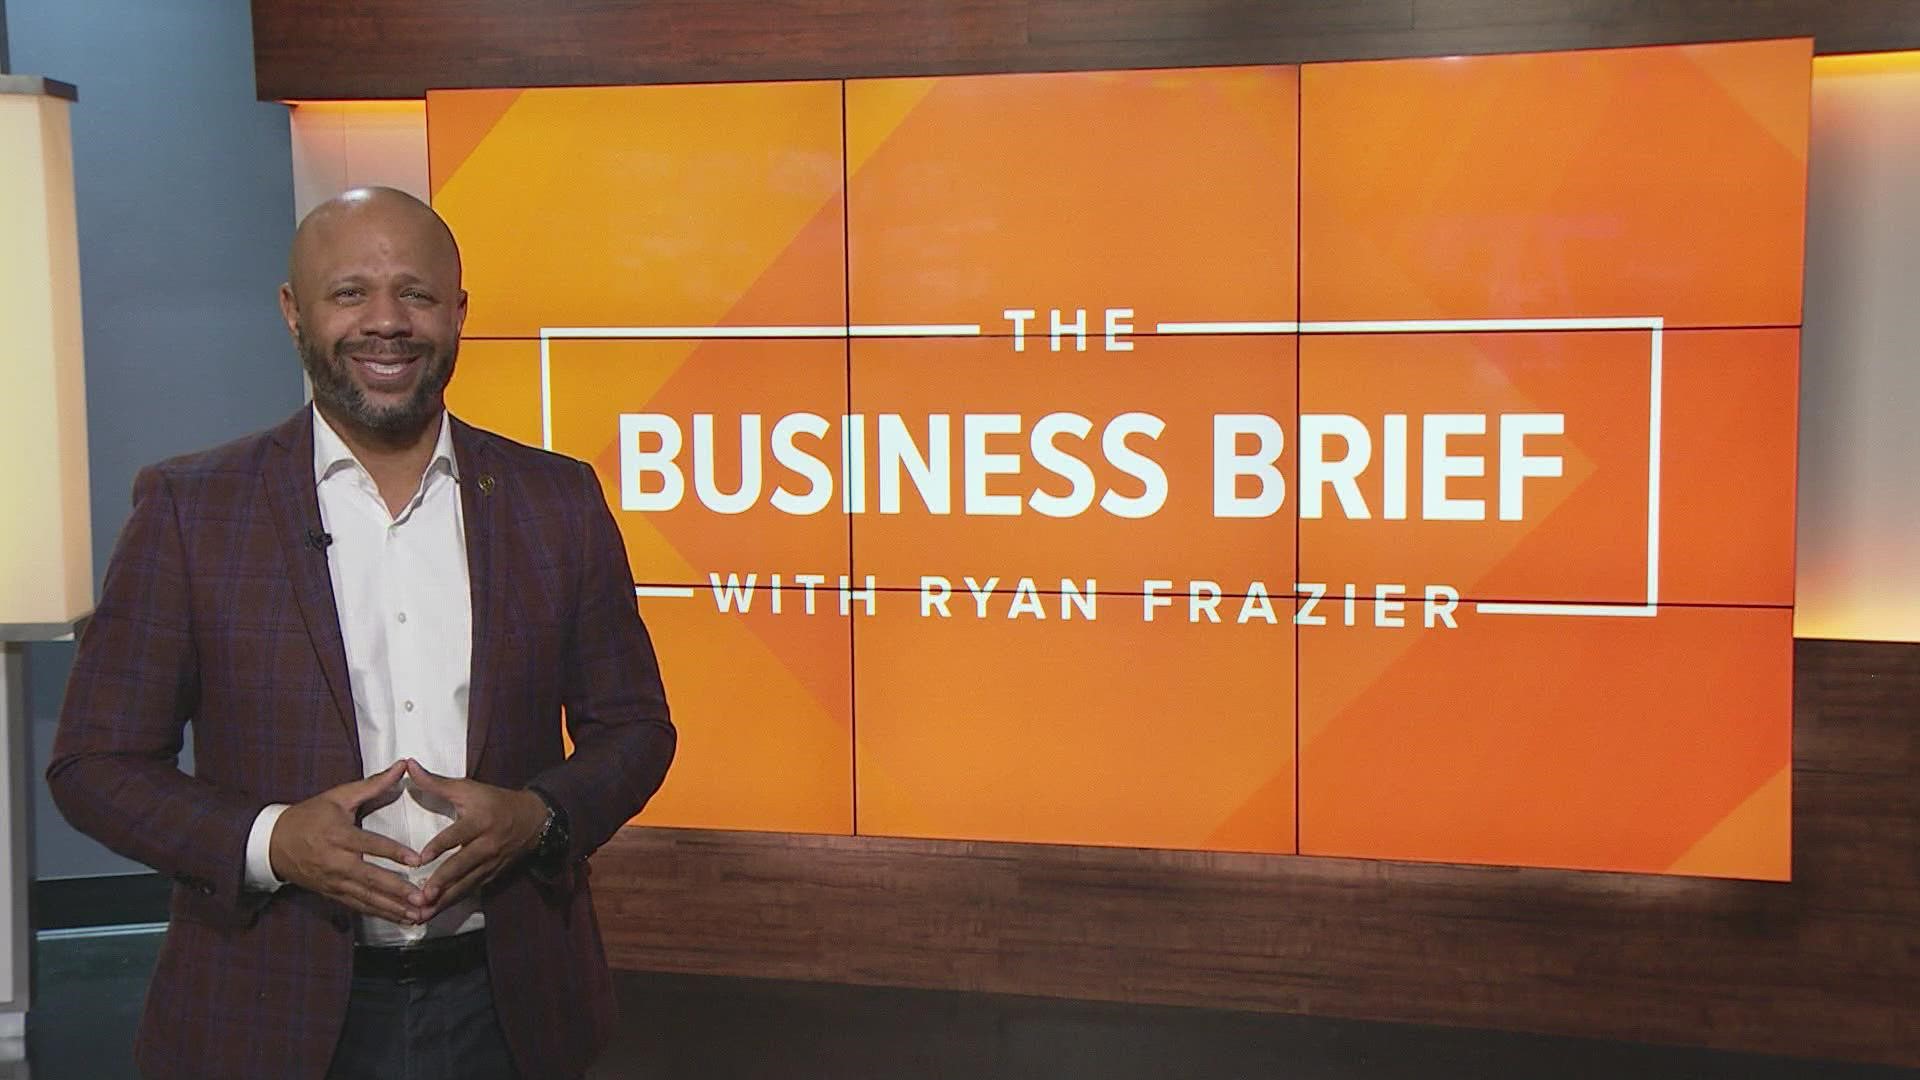 9NEWS Business Expert Ryan Frazier discusses new opportunities for entrepreneurs and small businesses.